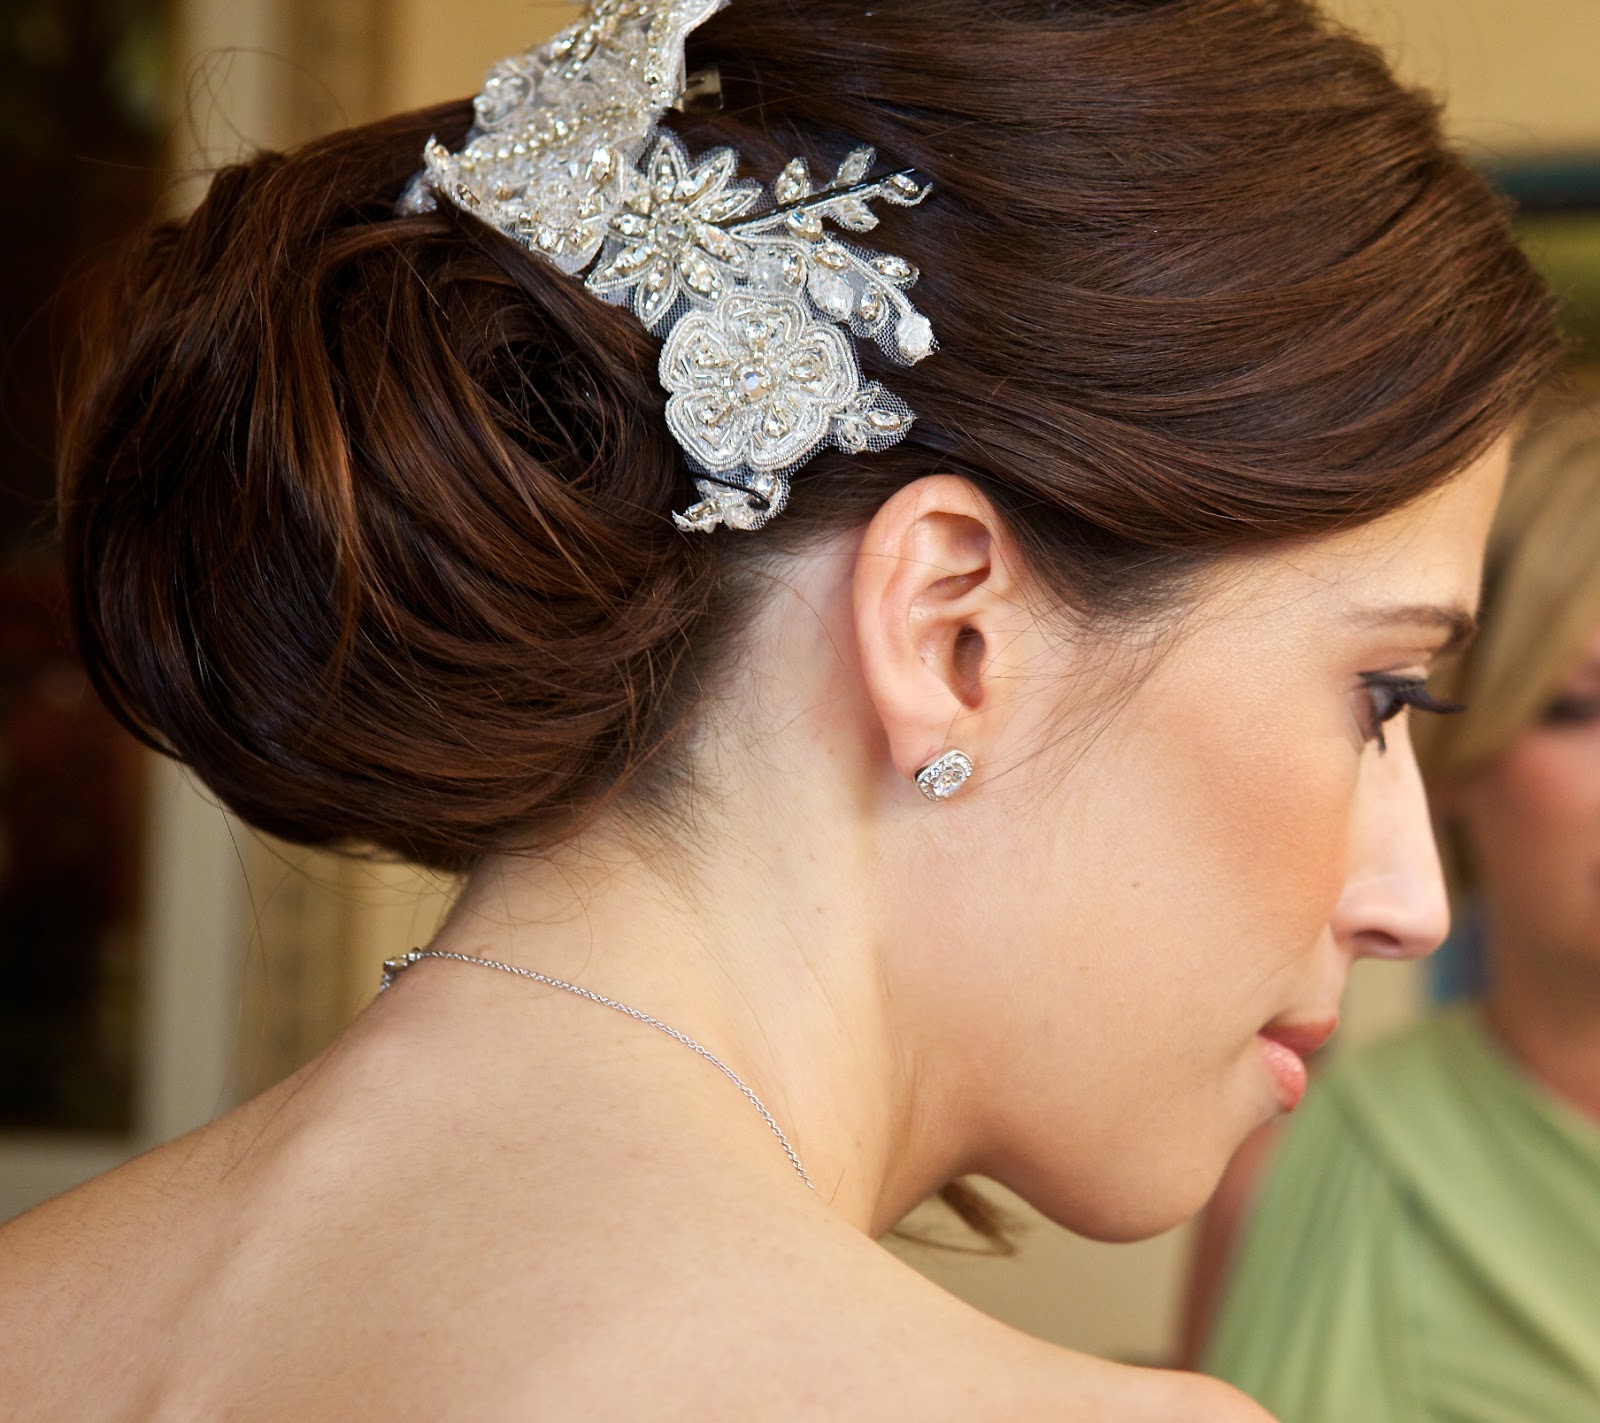 DIY Bridal Hairpiece with help from The White Flower and Justine M